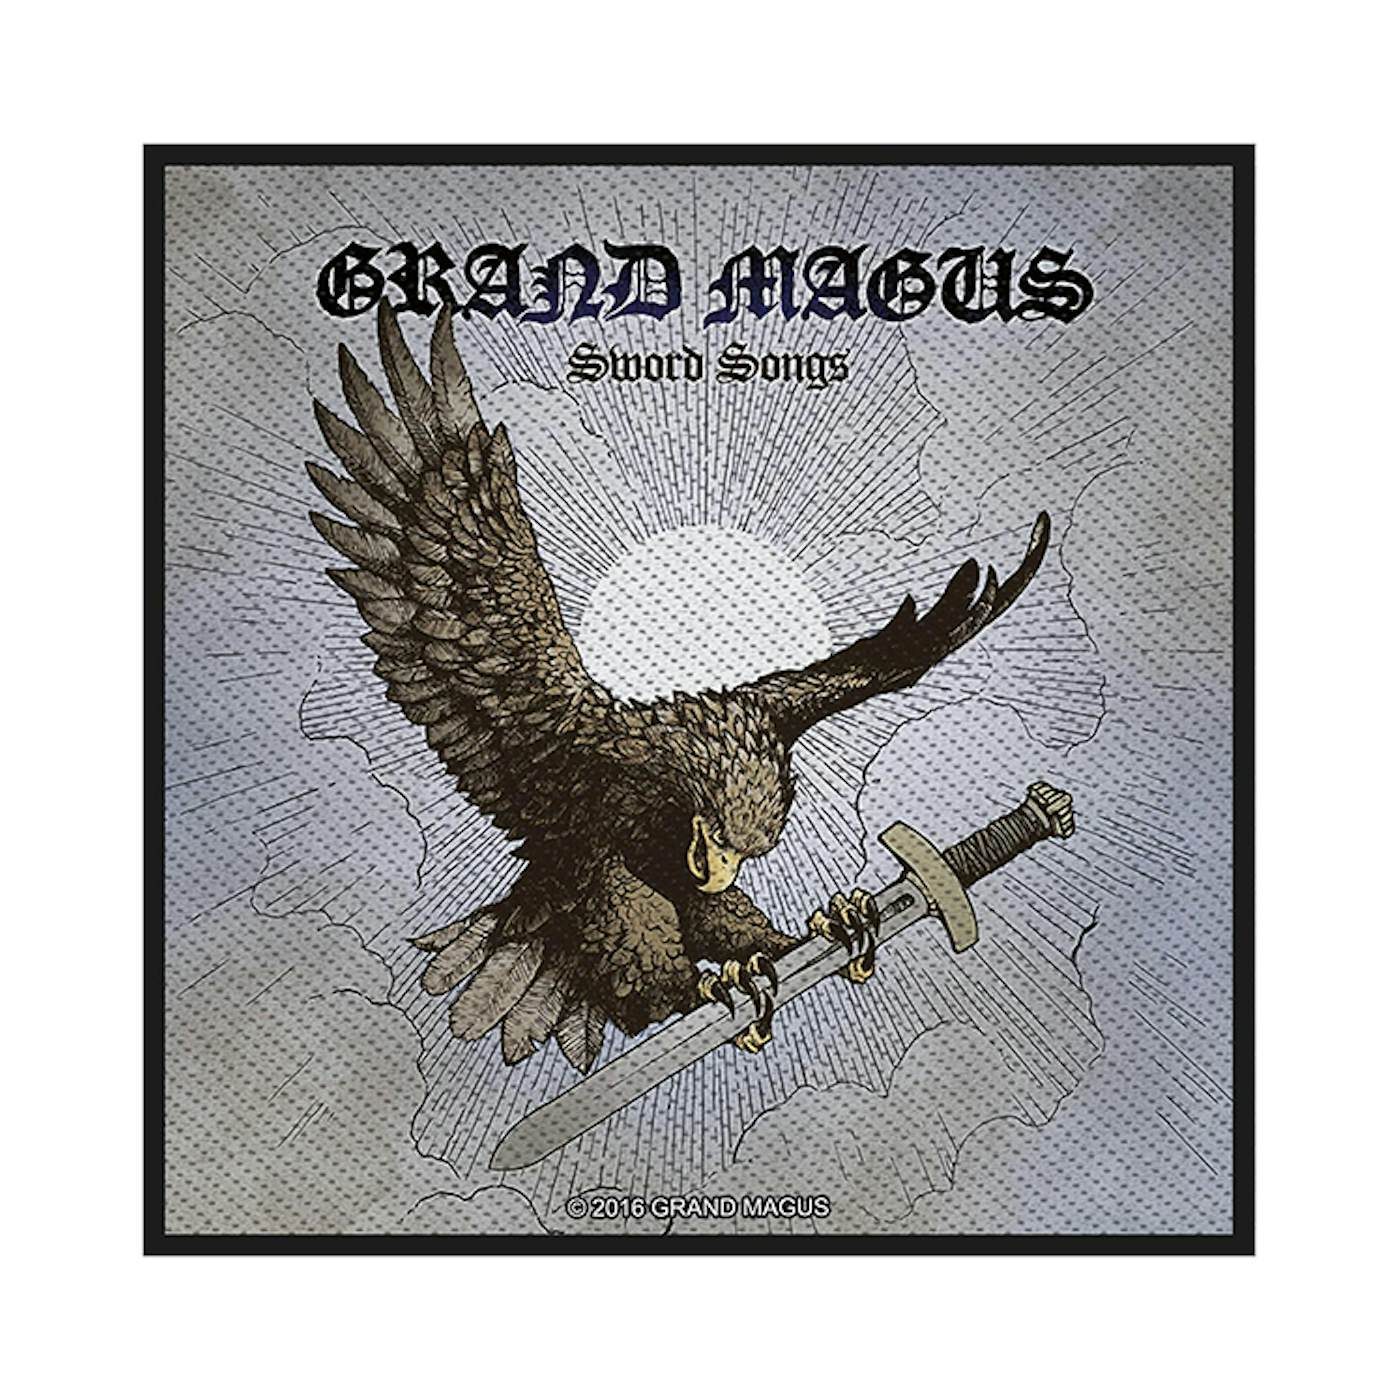 GRAND MAGUS - 'Sword Songs' Patch